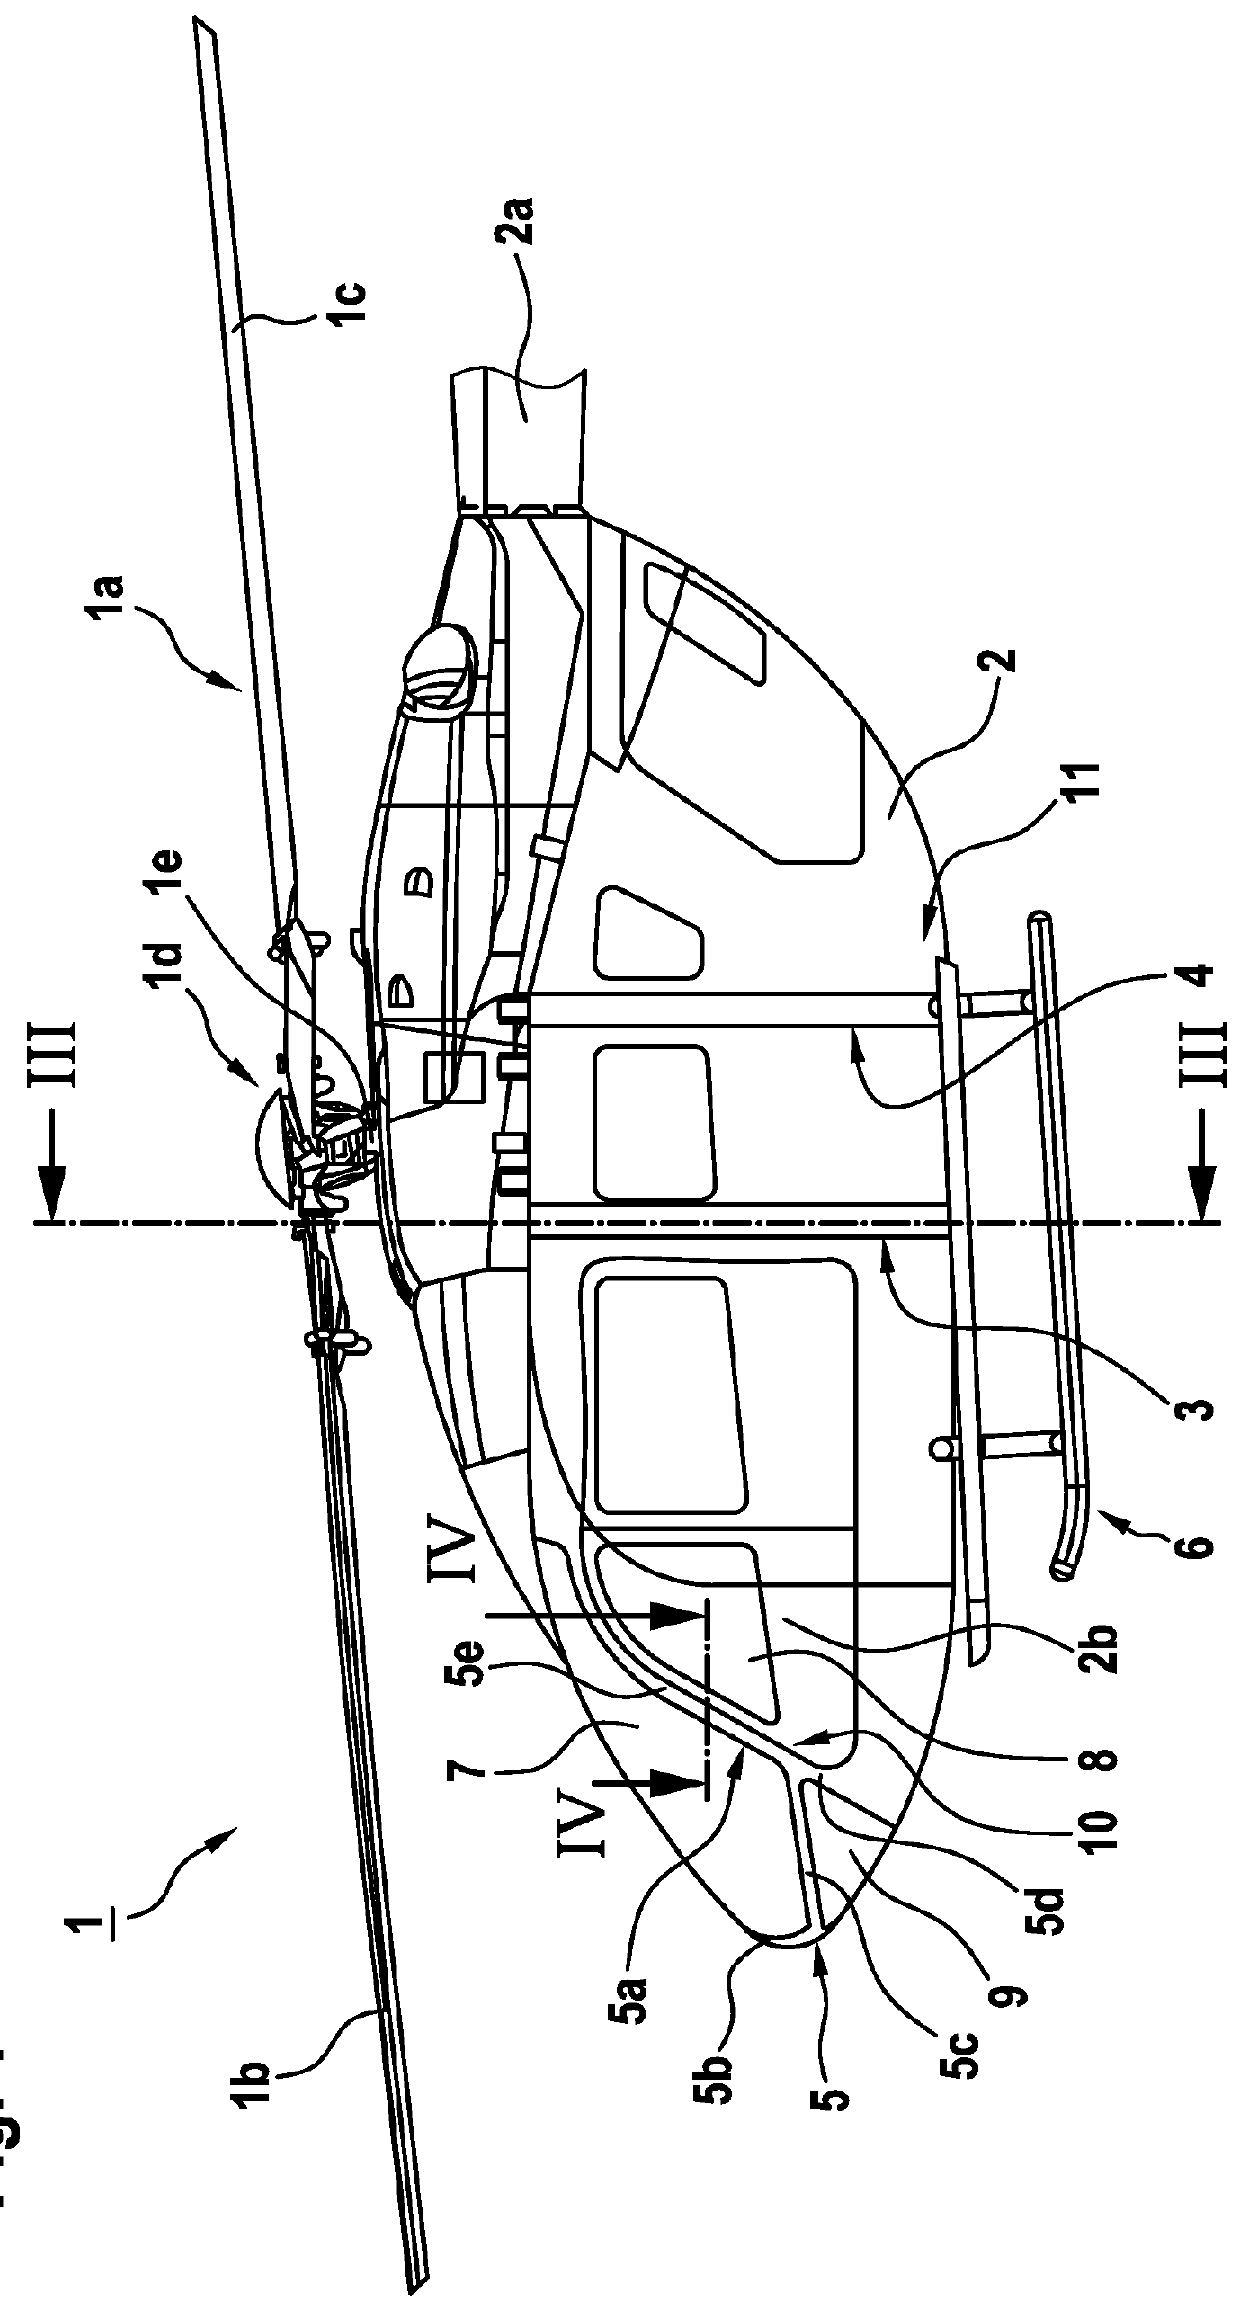 Aircraft with a framework structure that comprises at least one hollow frame